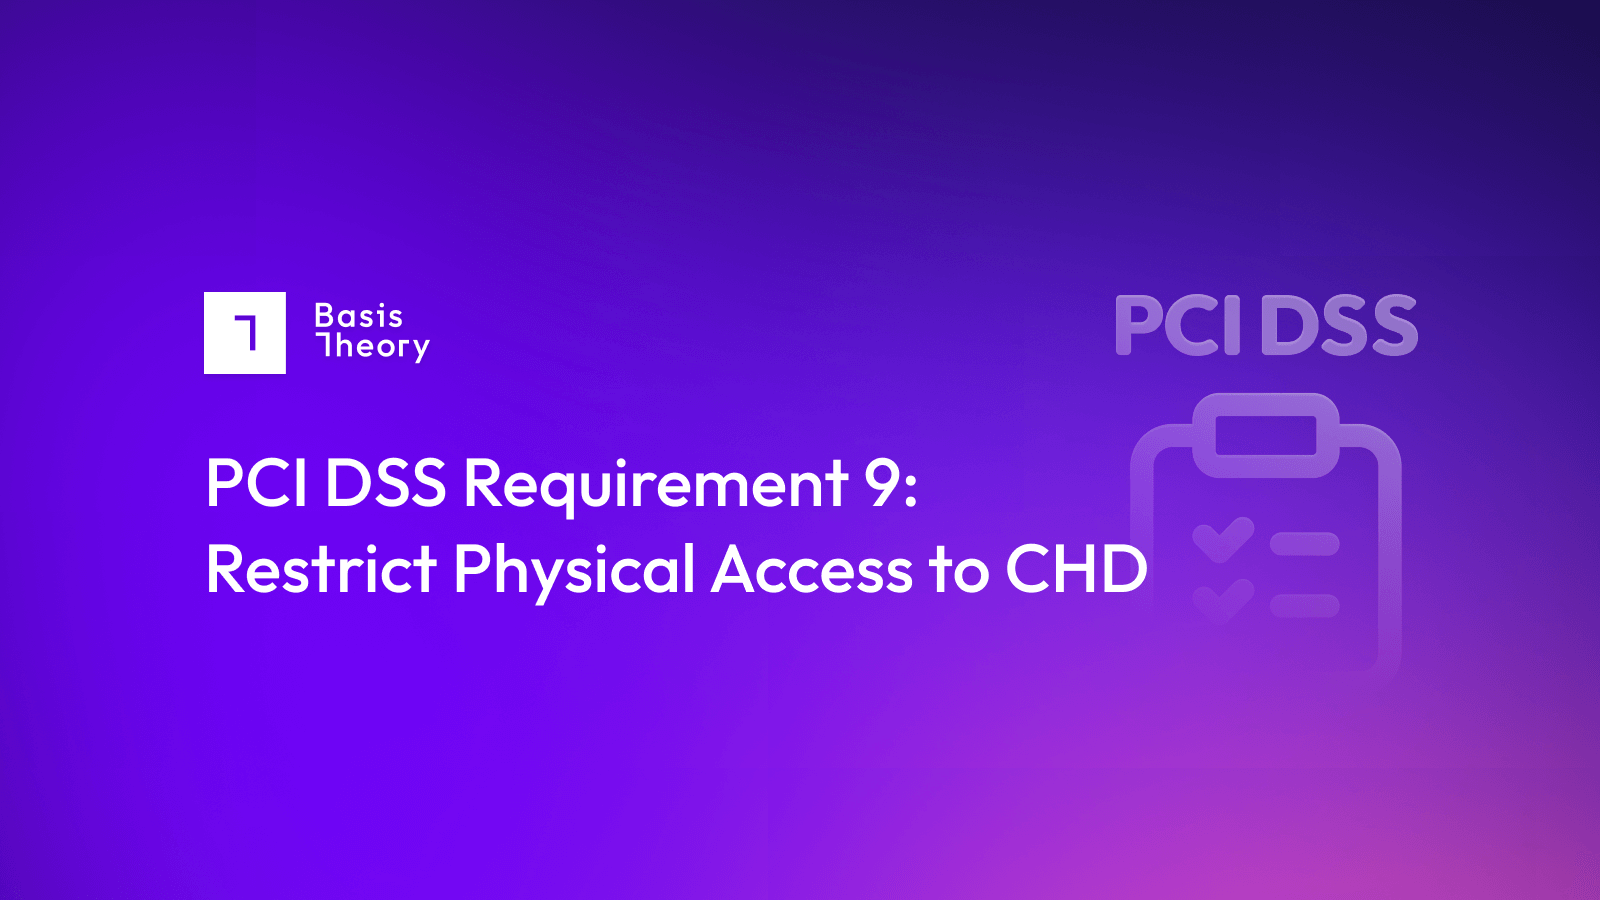 PCI DSS Requirement 9